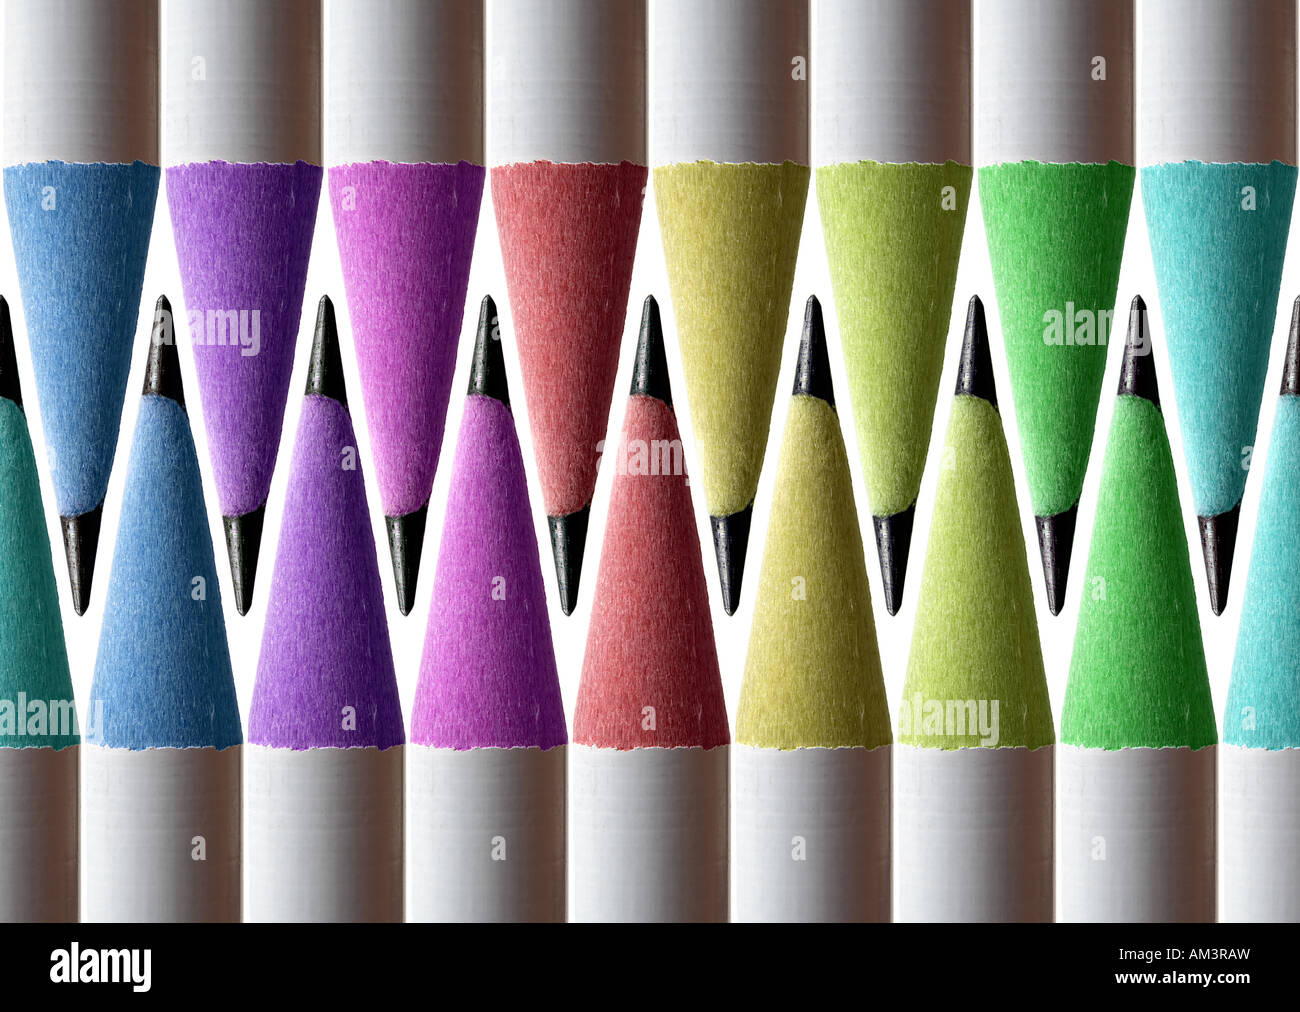 Pencils with colored wood Stock Photo